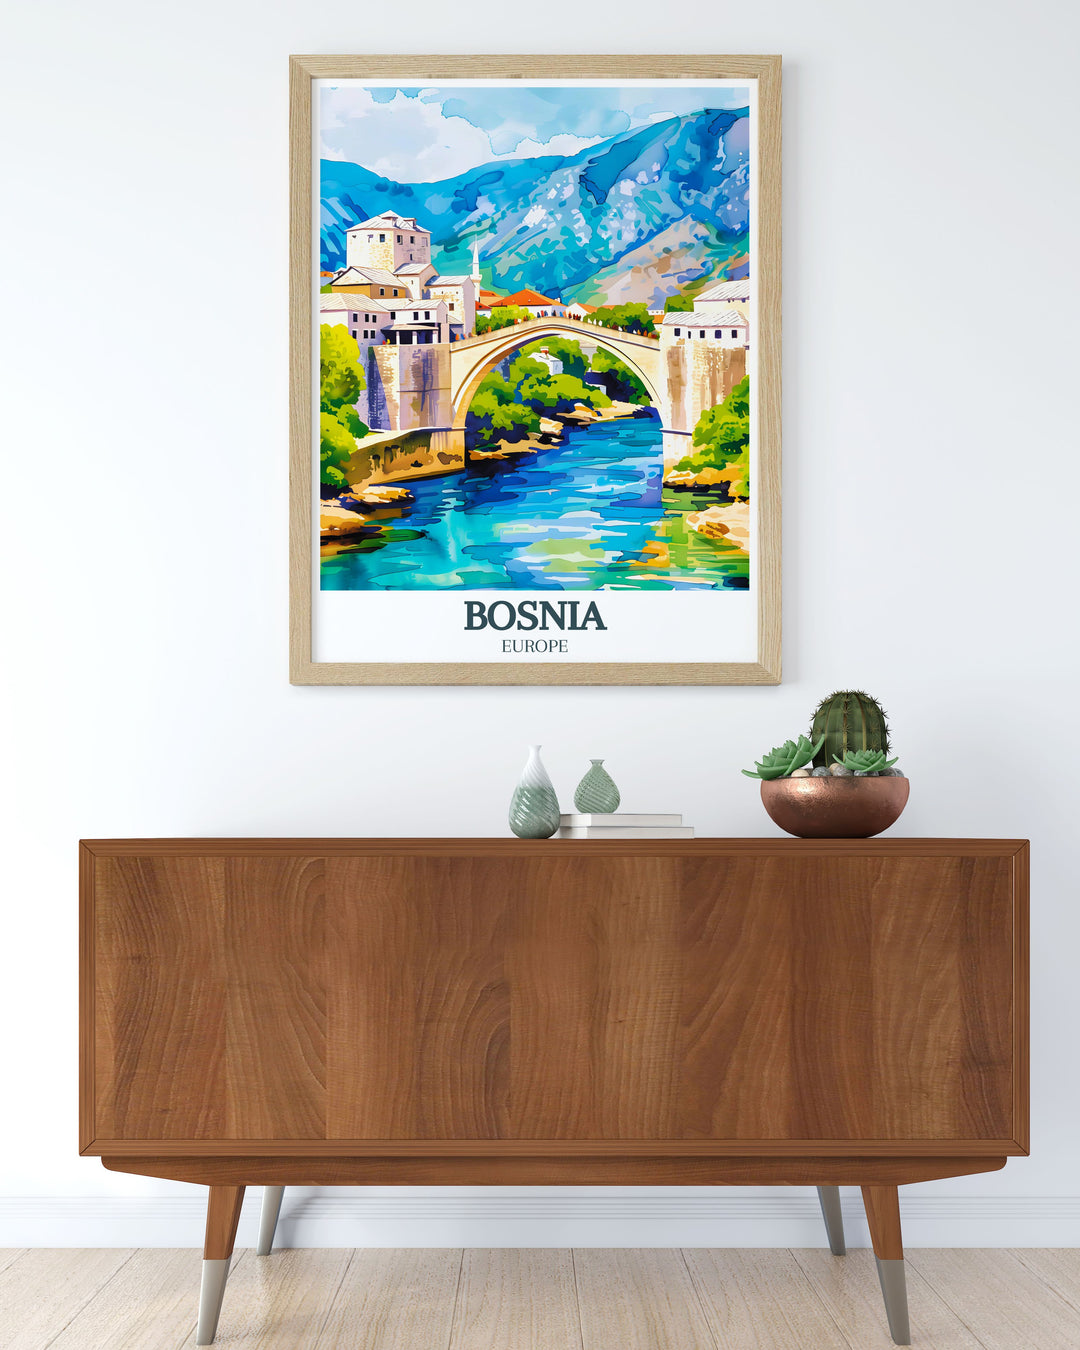 Mostar, Stari Most bridge in a stunning Bosnia Poster Print. This travel inspired artwork brings the vibrant atmosphere of Mostar to life, making it a perfect piece for those who love cultural landmarks and historic sites